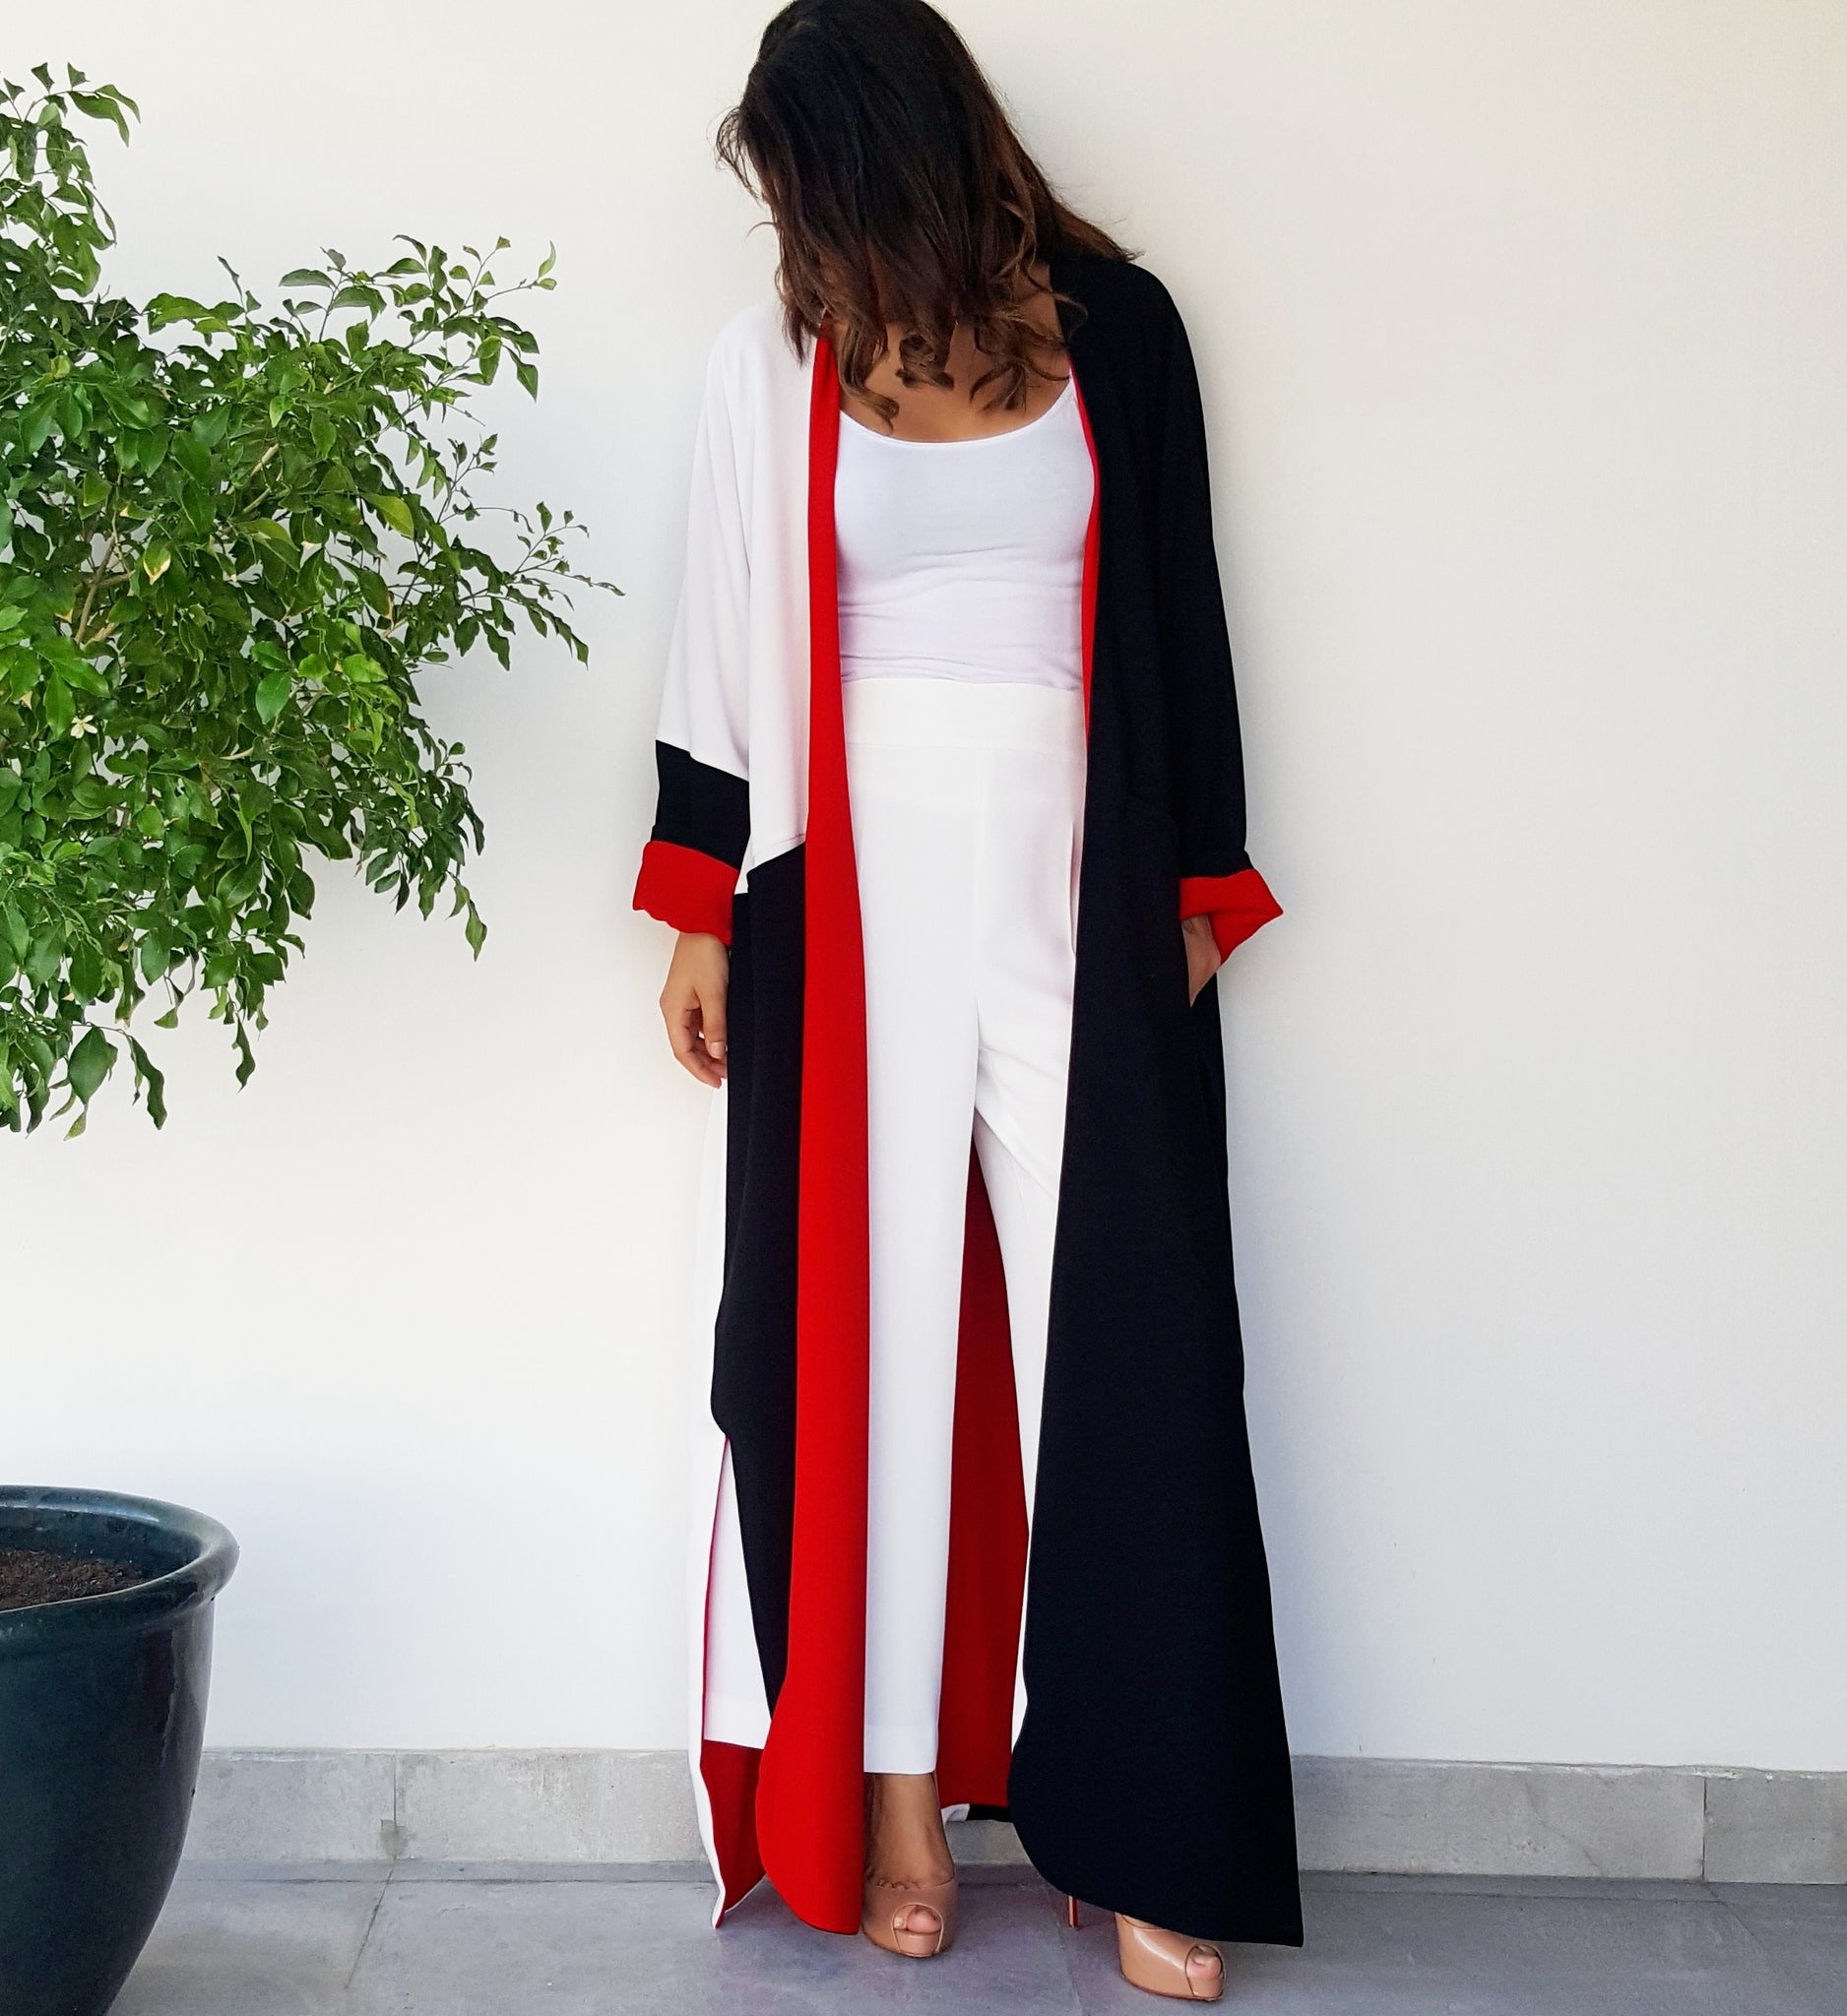 AW17 MONOCHROME WITH RED LINING ABAYA WITH POCKETS